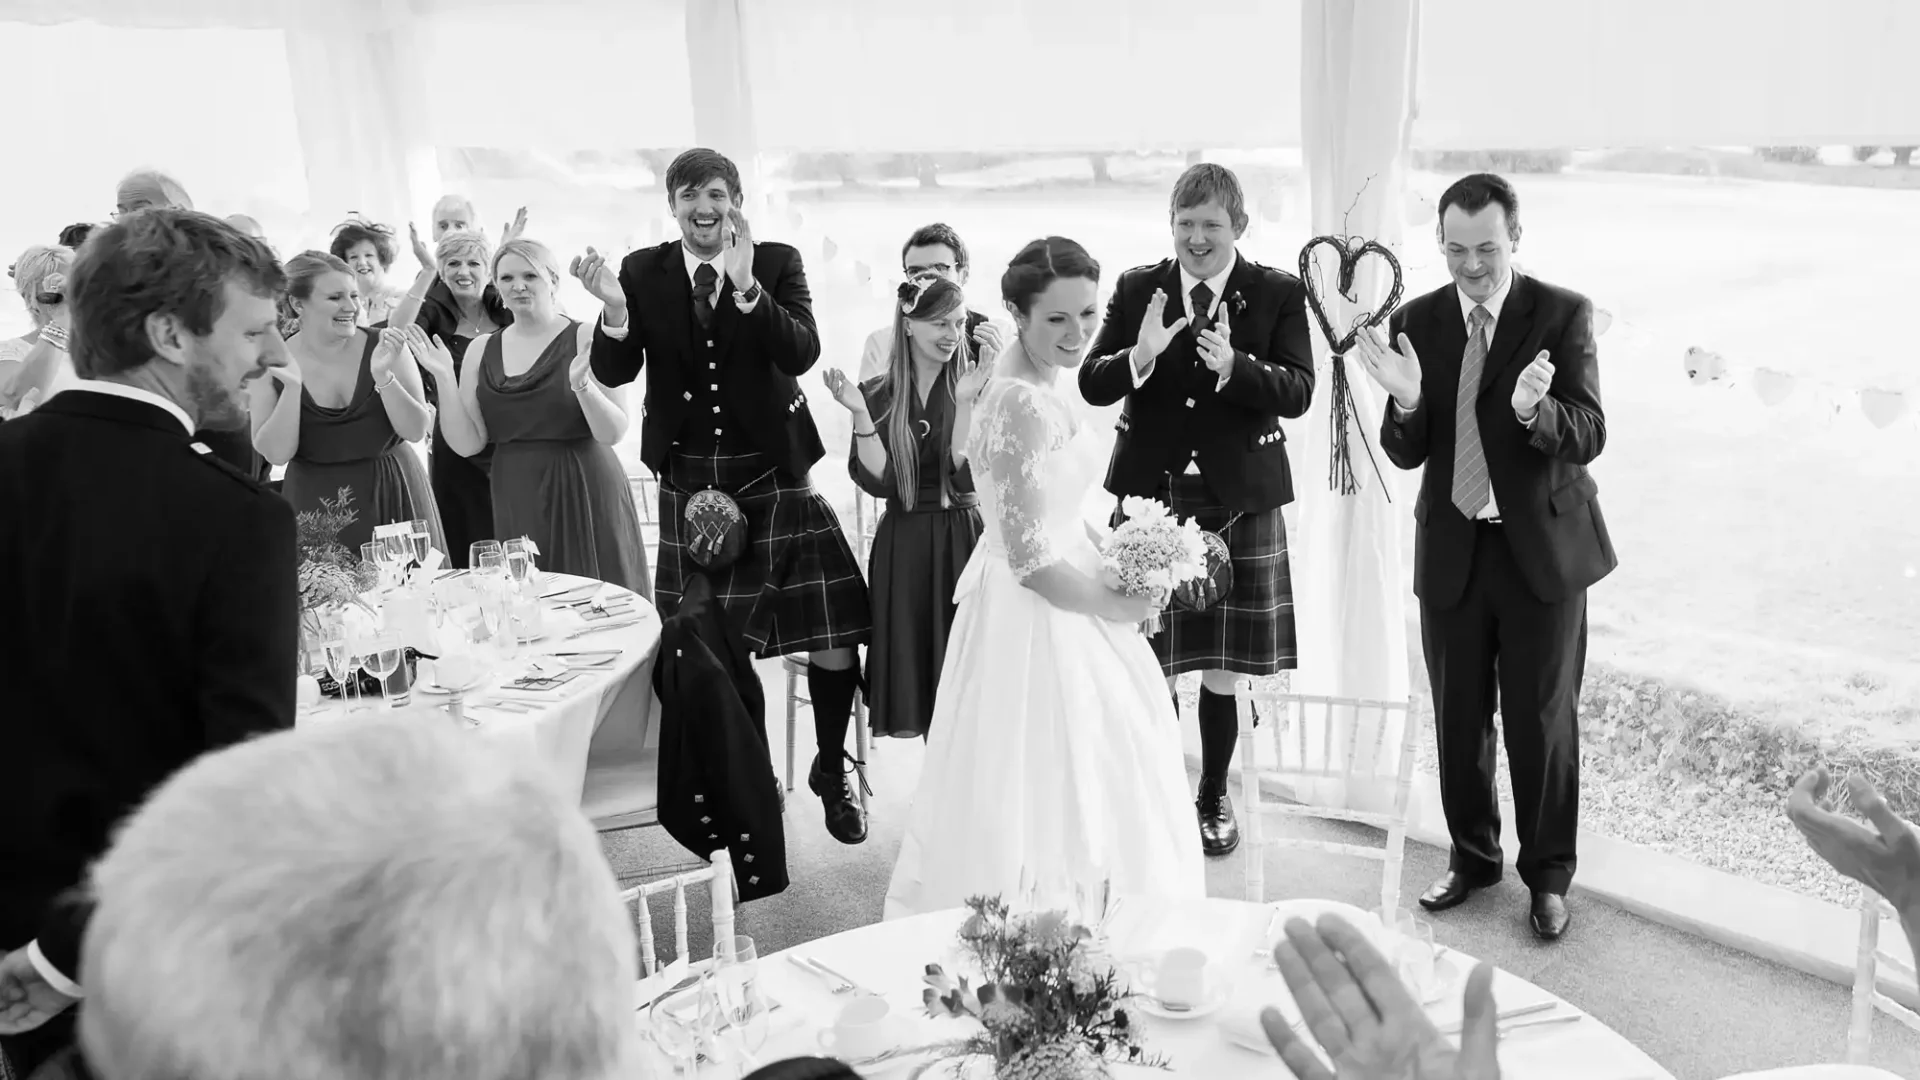 Bride and groom walking hand-in-hand through a clapping crowd at their wedding reception, guests wearing traditional scottish attire.